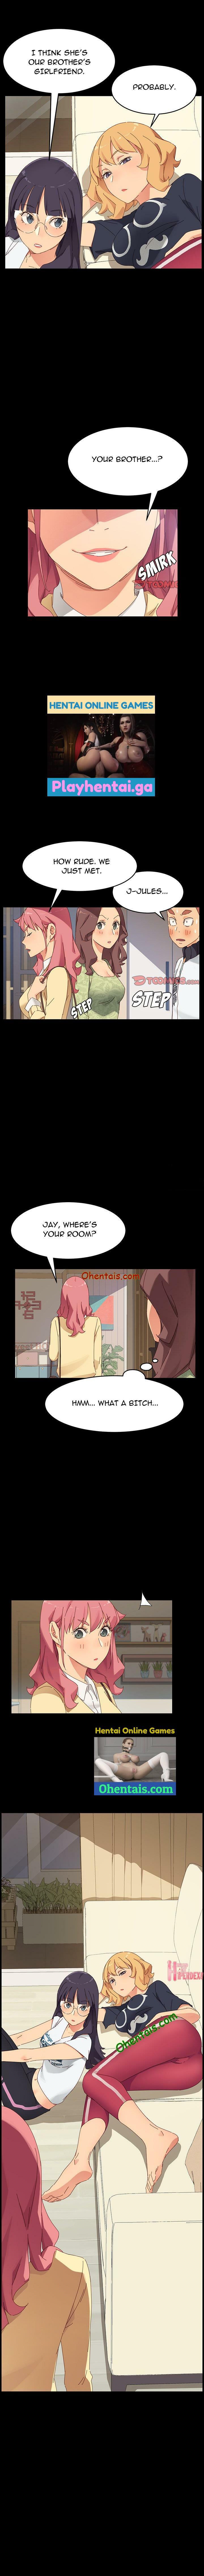 Jerking PERFECT ROOMMATES Ch. 7 Real Couple - Page 8